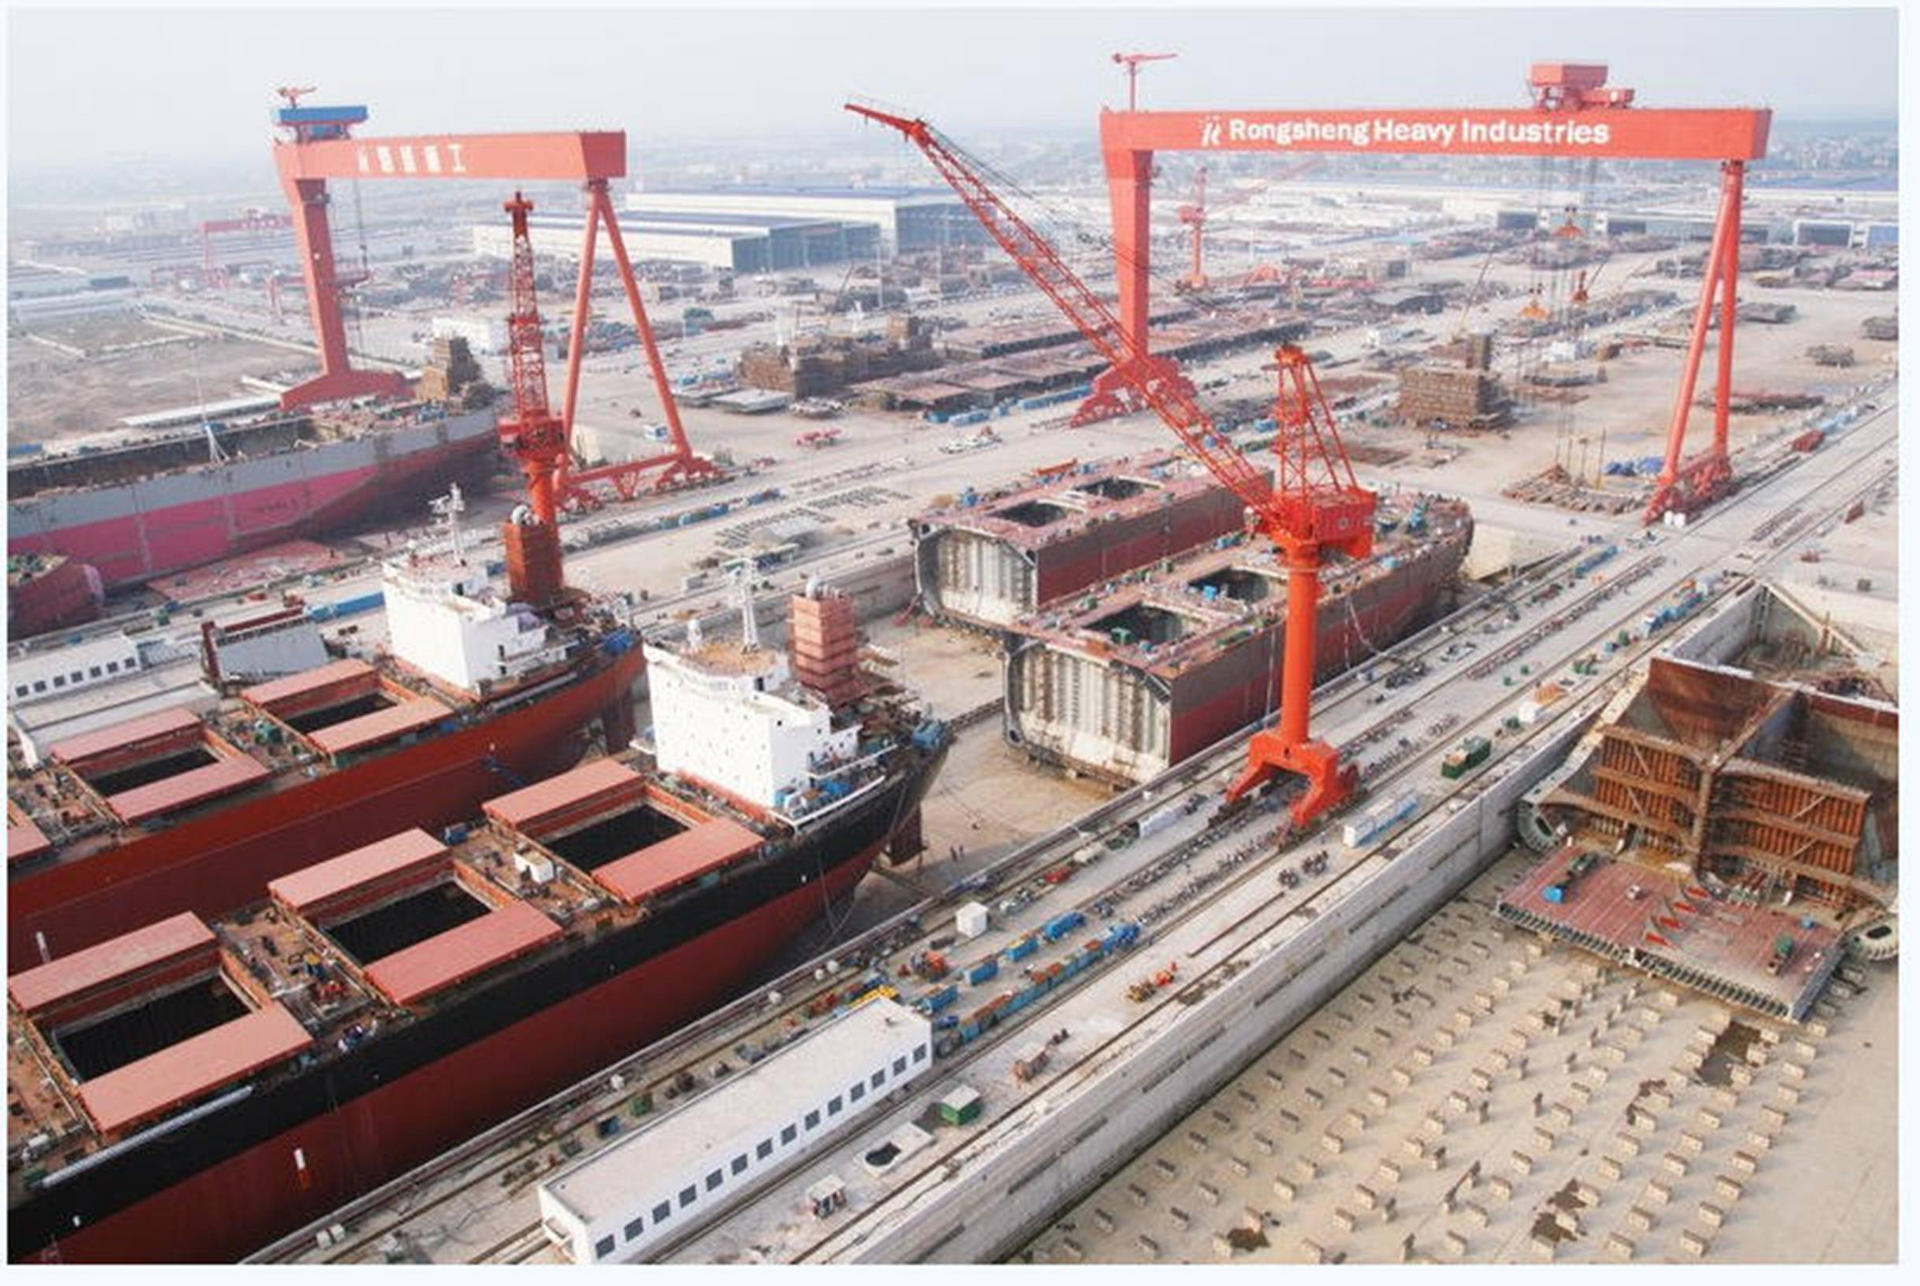 Despite a mild recovery in the shipbuilding market over the past 18 months, Rongsheng has received few new orders. Photo: SCMP